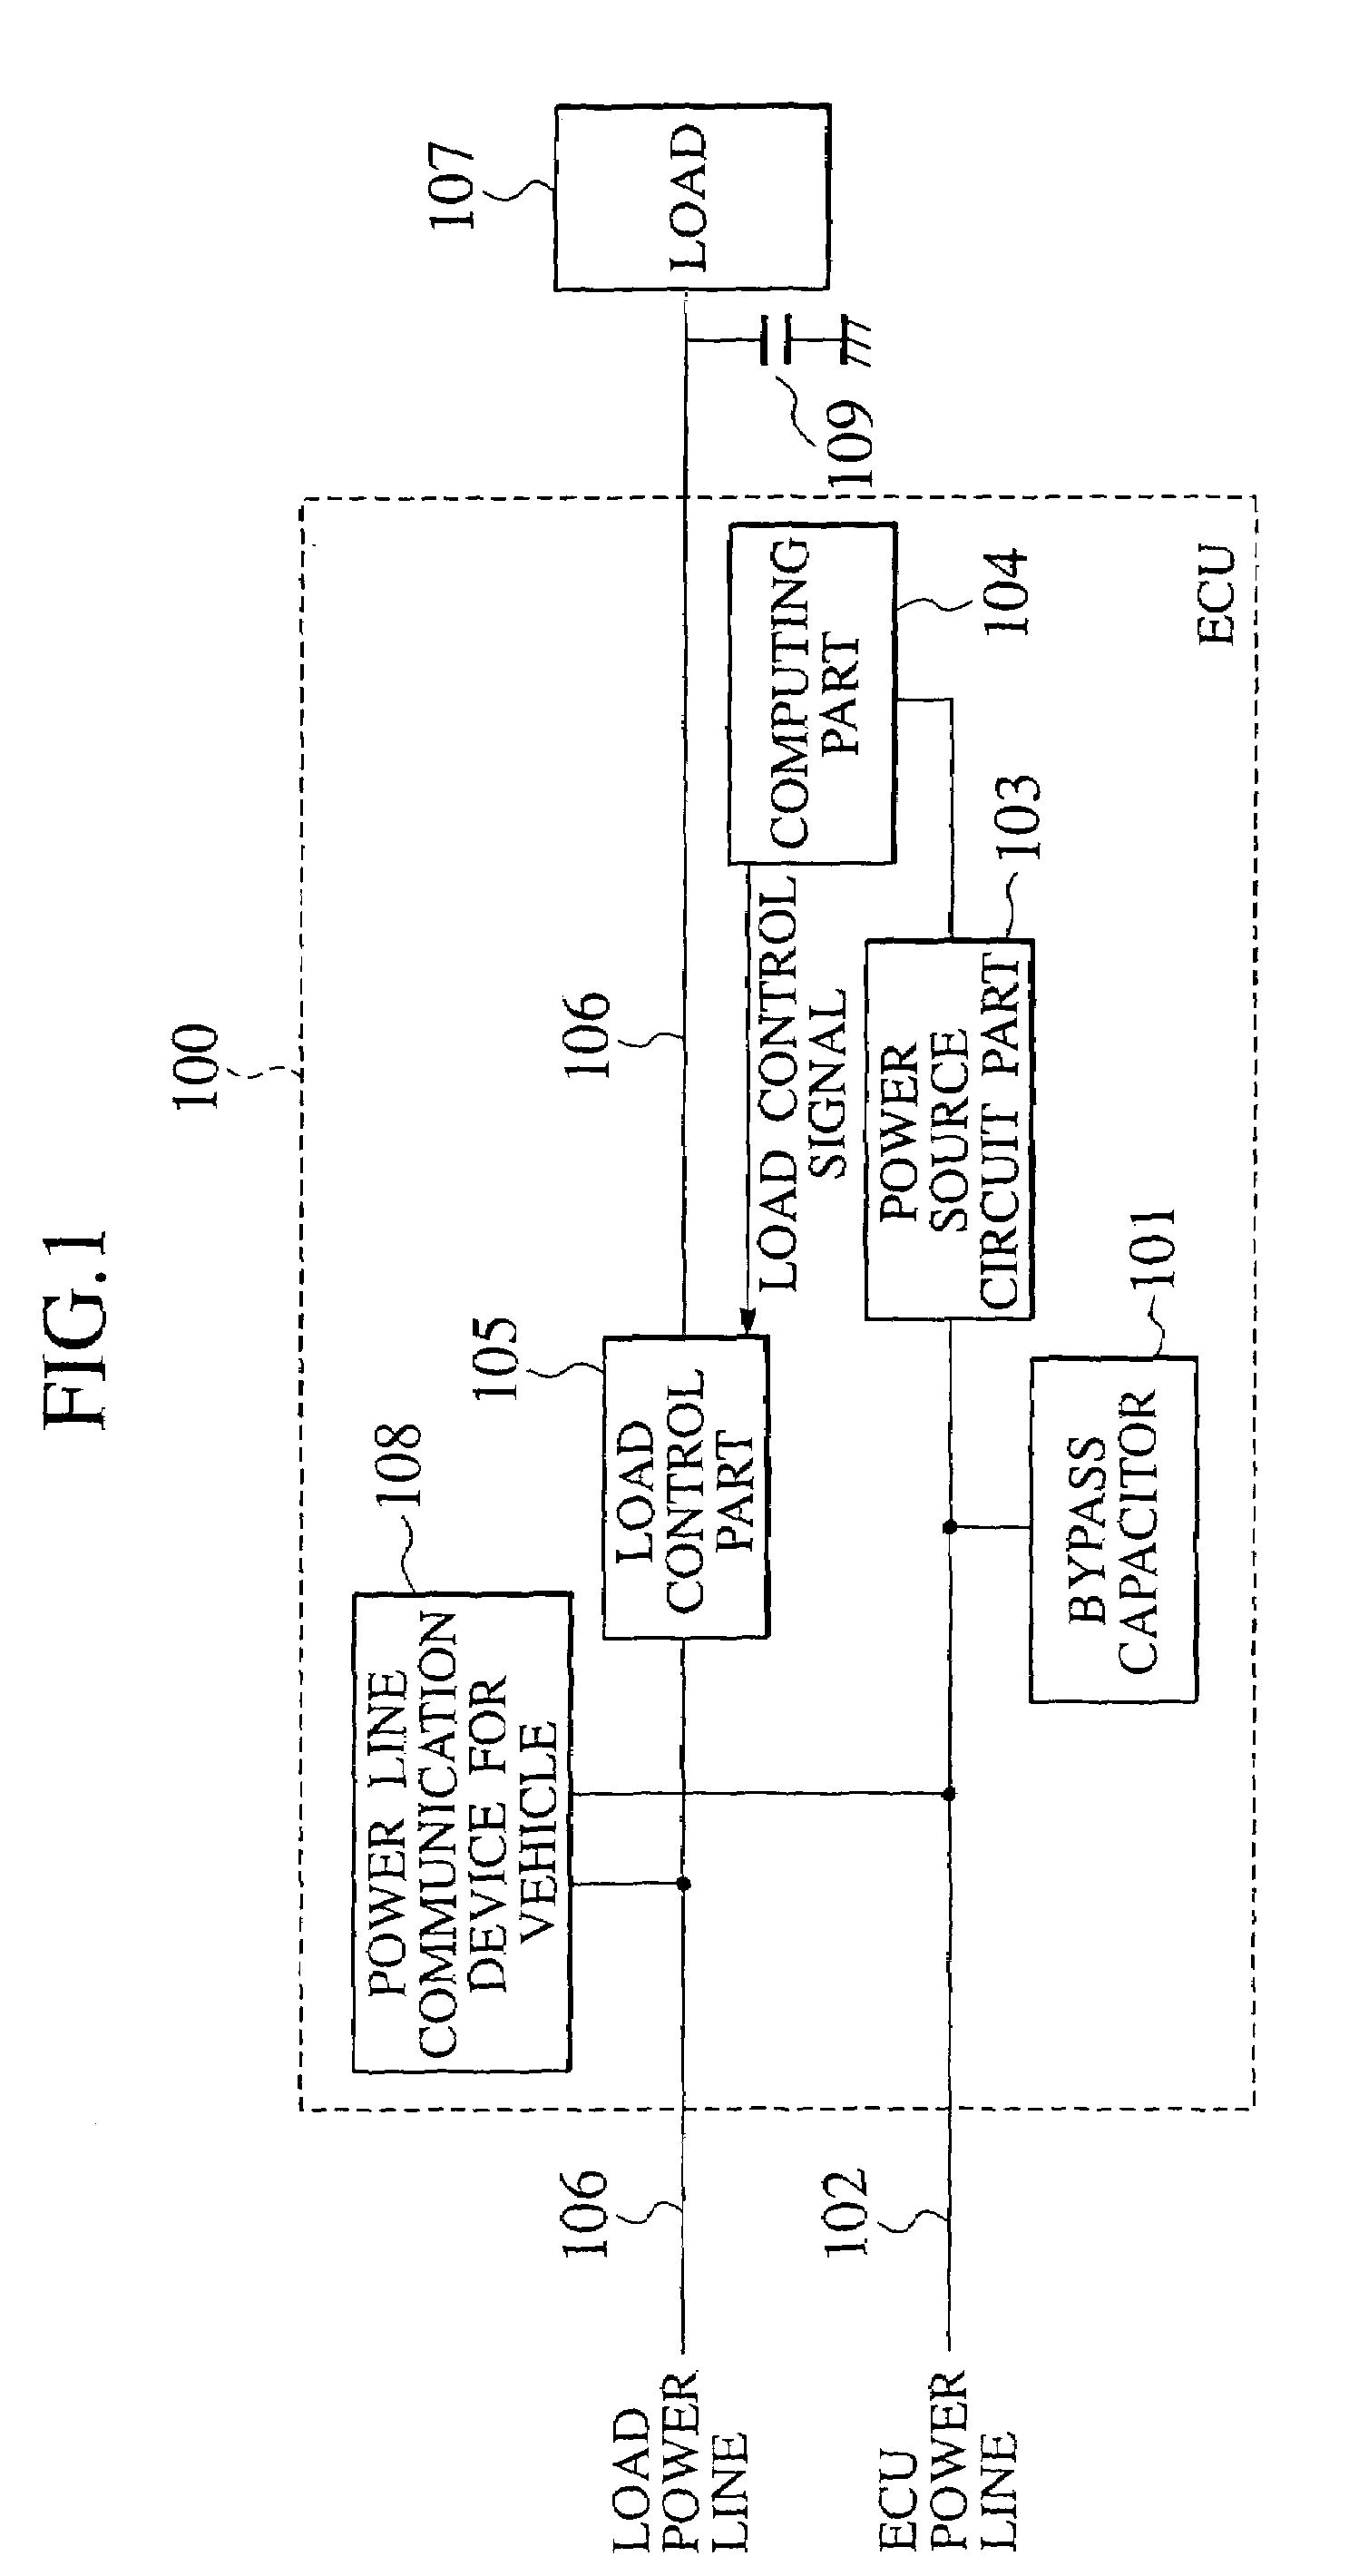 Power line communication device for vehicle